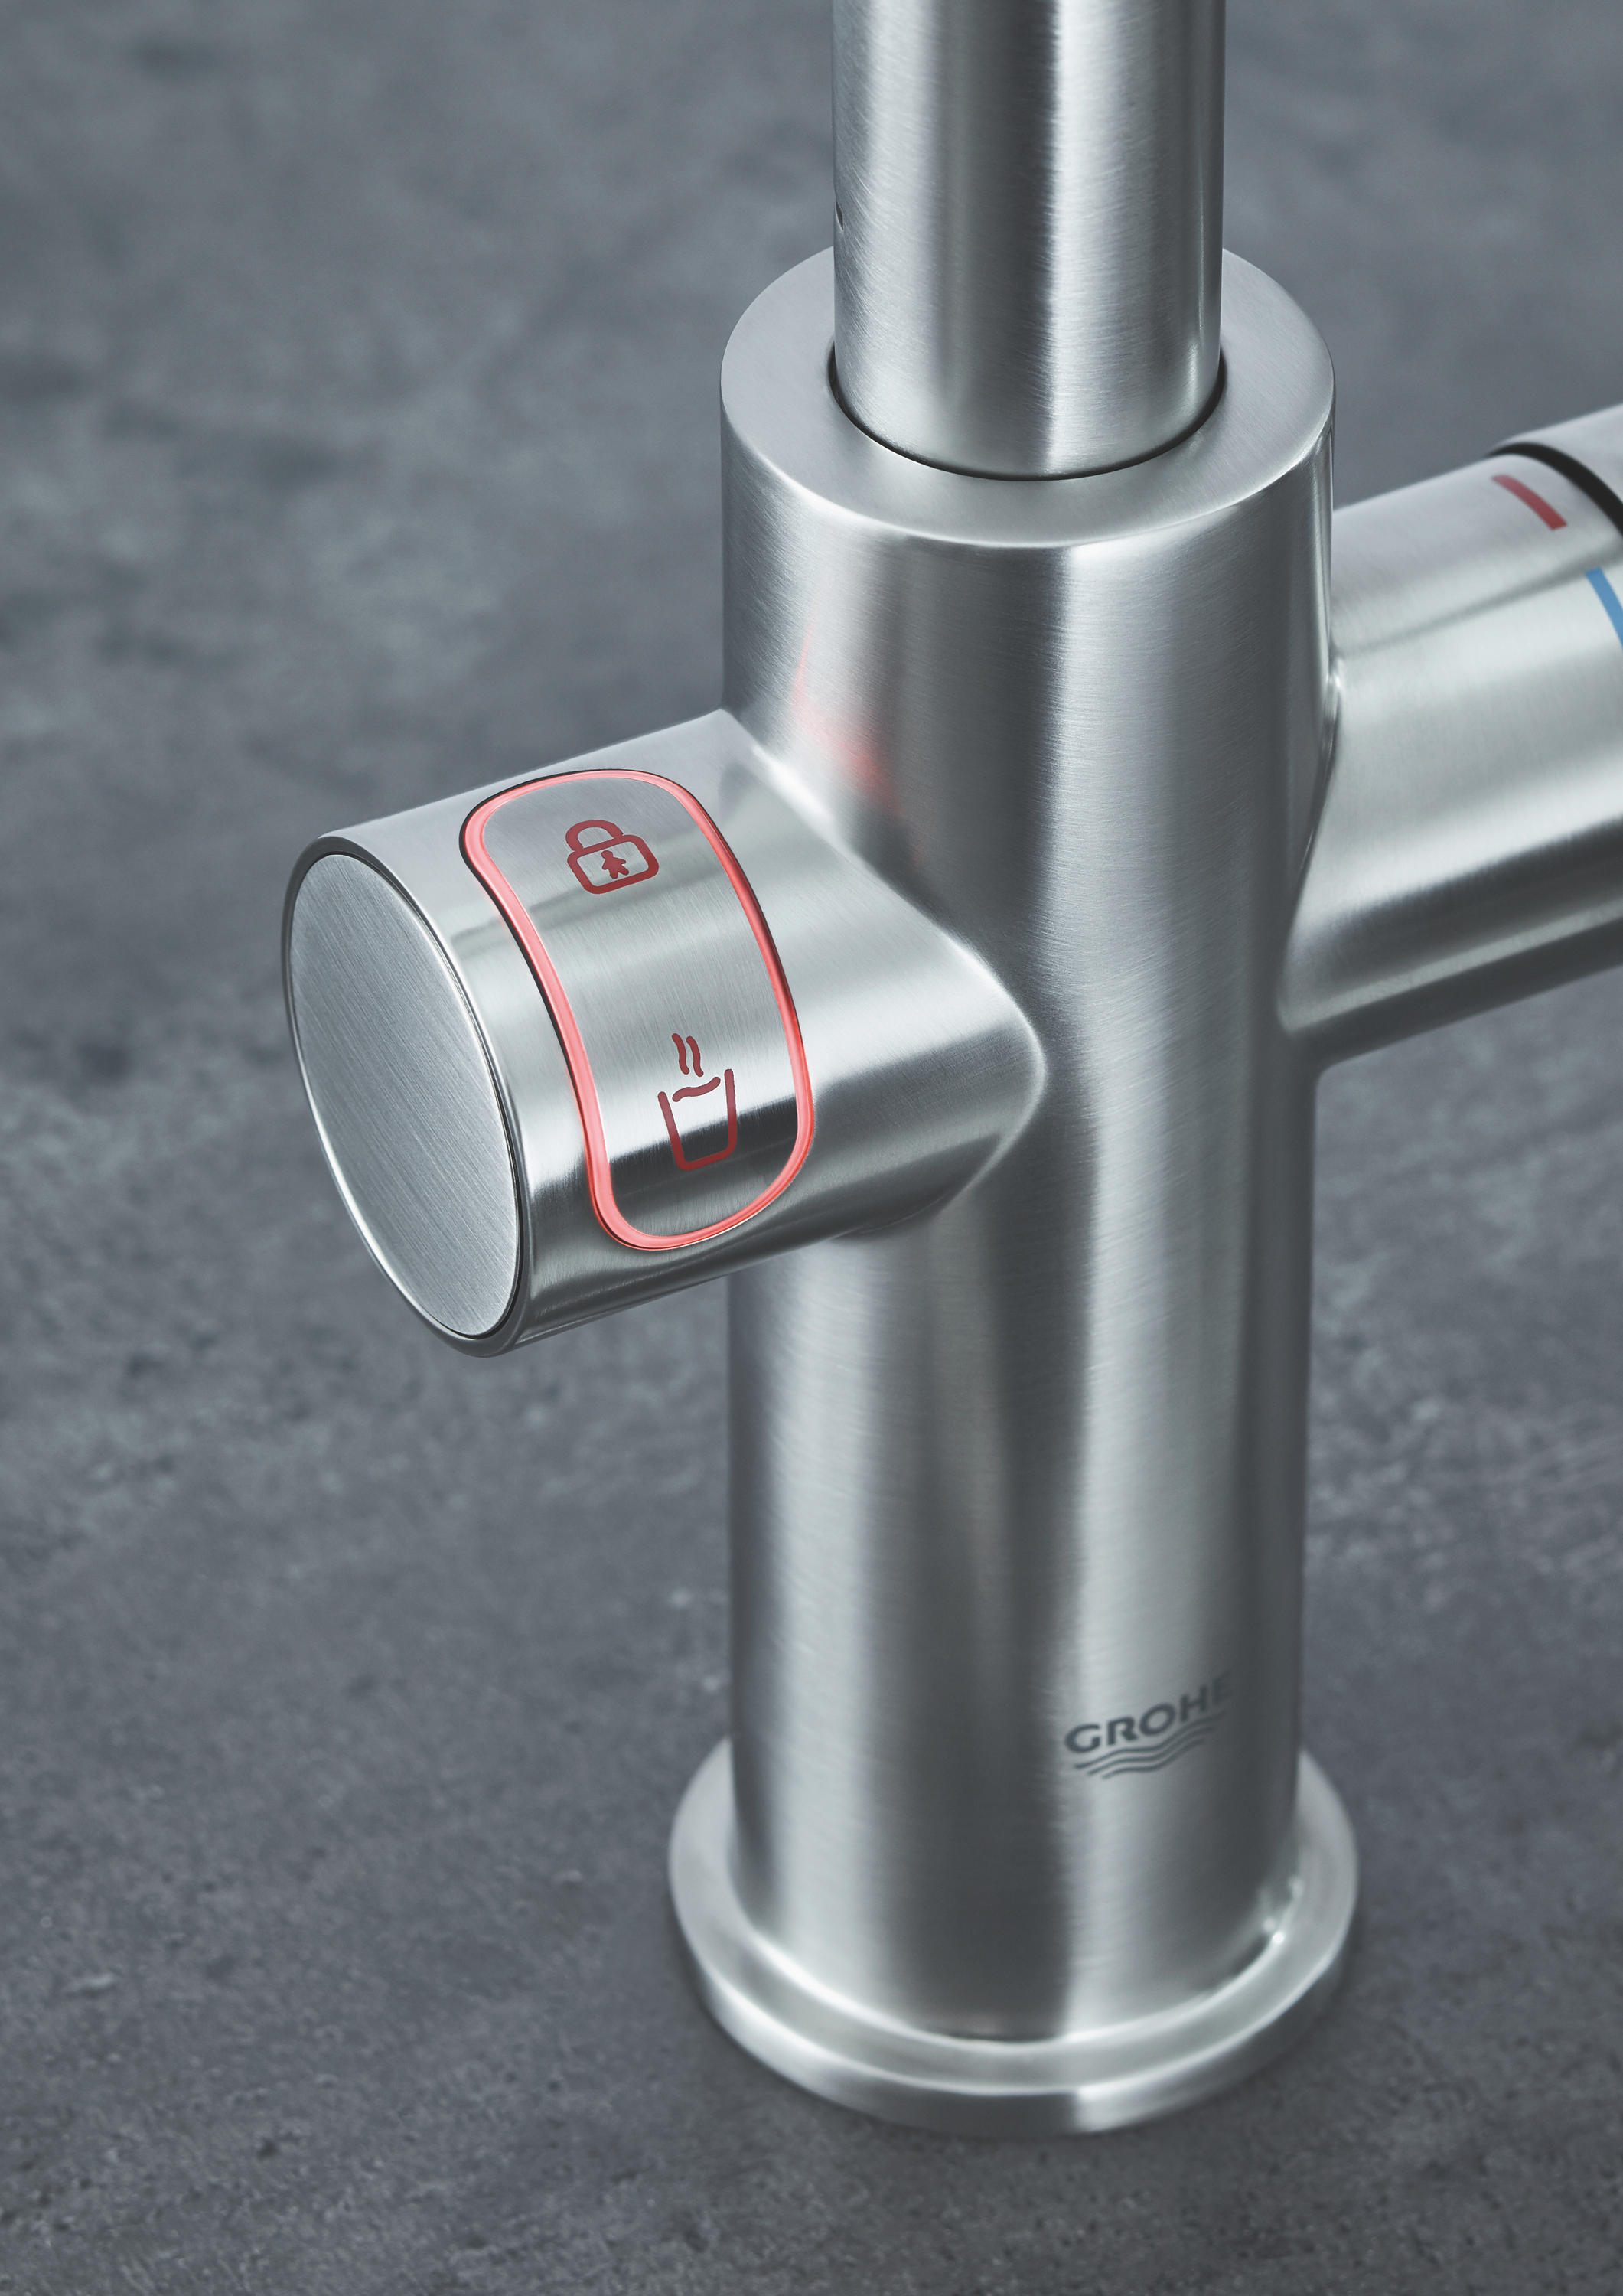 GROHE Duo Faucet and single-boiler size L | Architonic